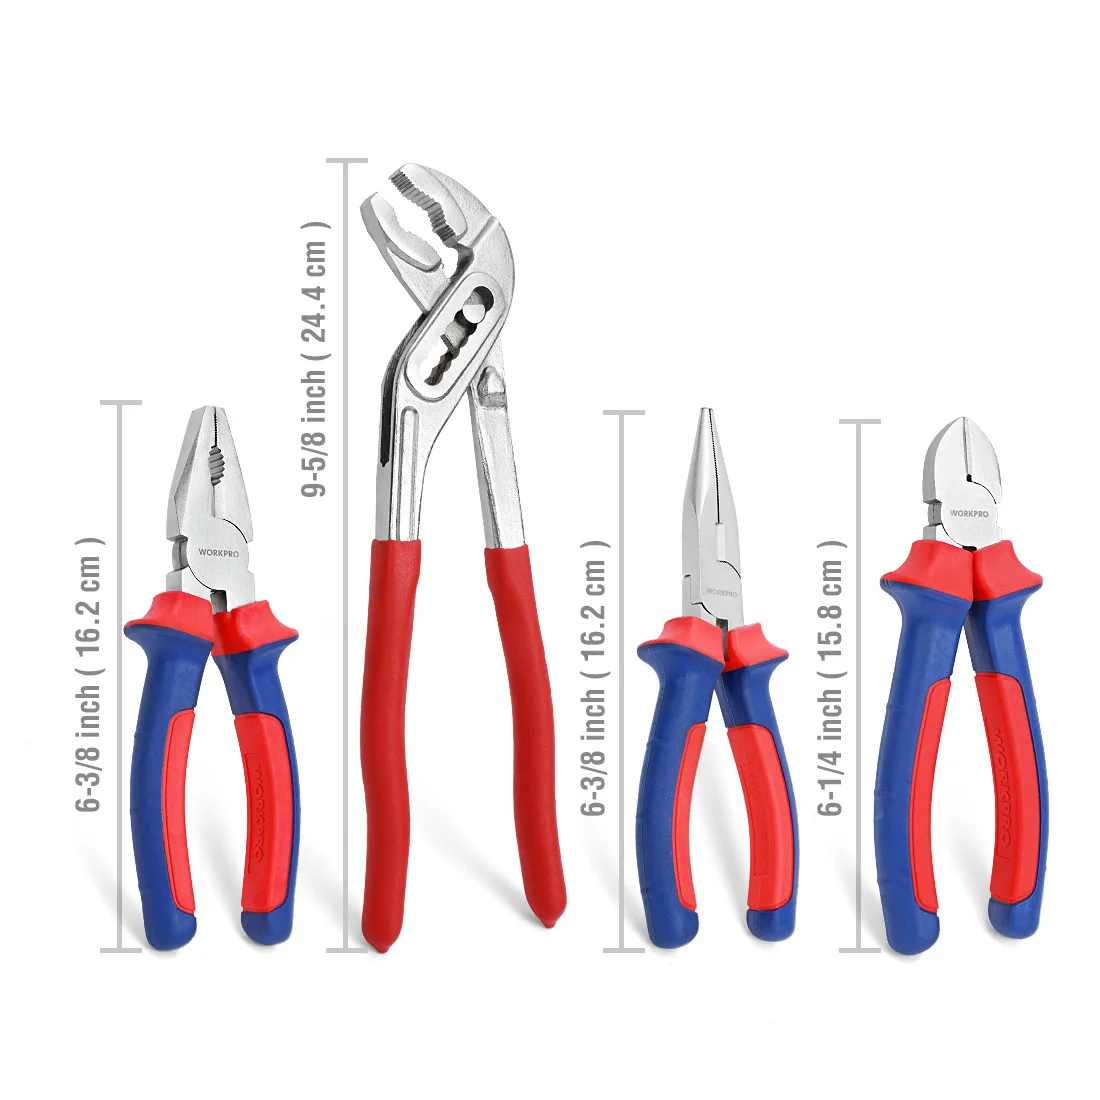 WORKPRO 7-piece Pliers Set for DIY & Home Use and India